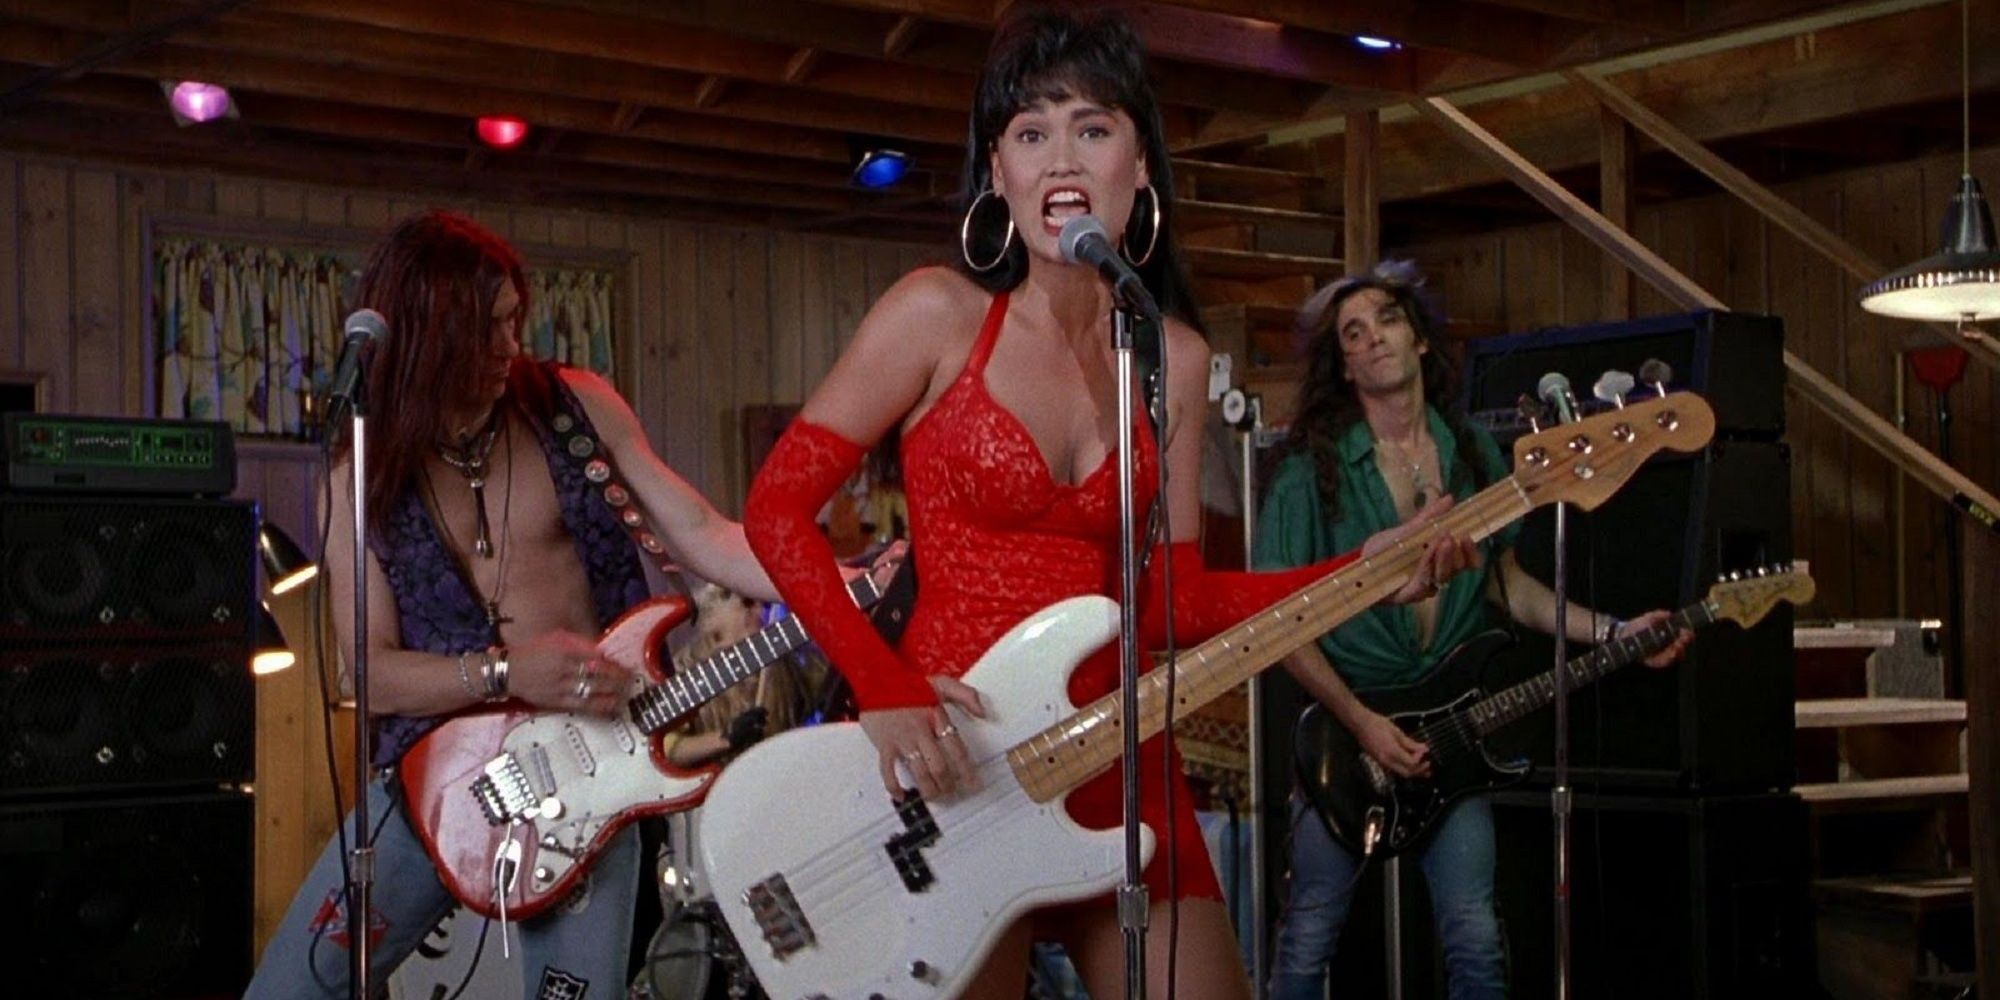 Cassandra Wong in a red dress performing with her band and playing bass guitar in Wayne's World.